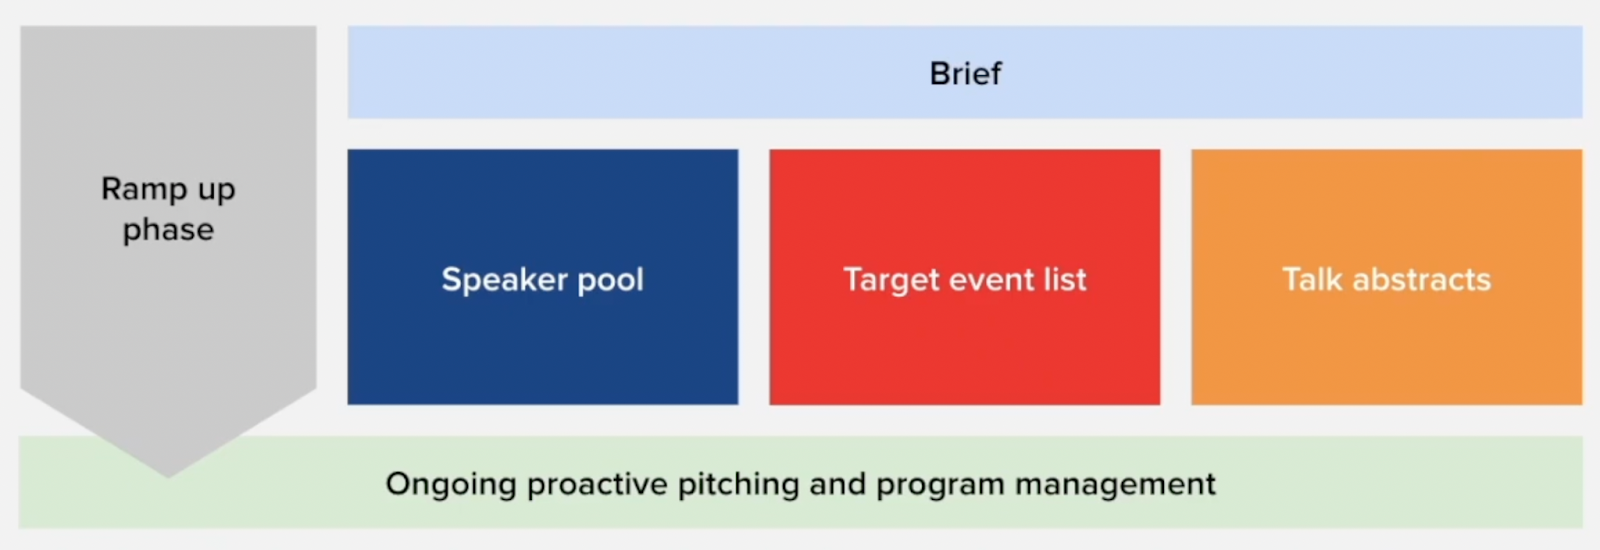 ongoing proactive pitching and program management